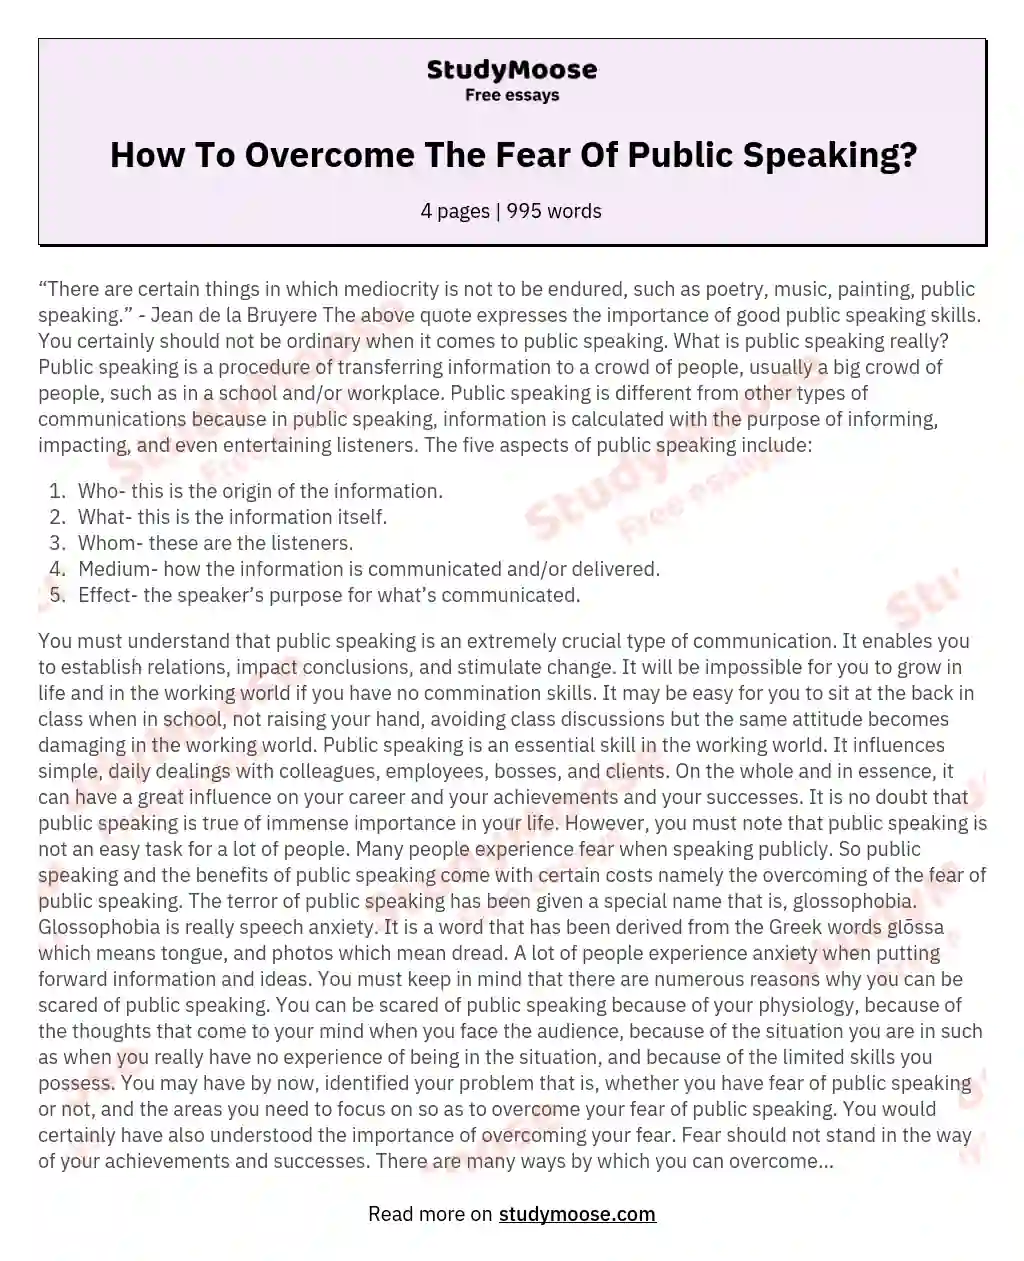 How To Overcome The Fear Of Public Speaking?